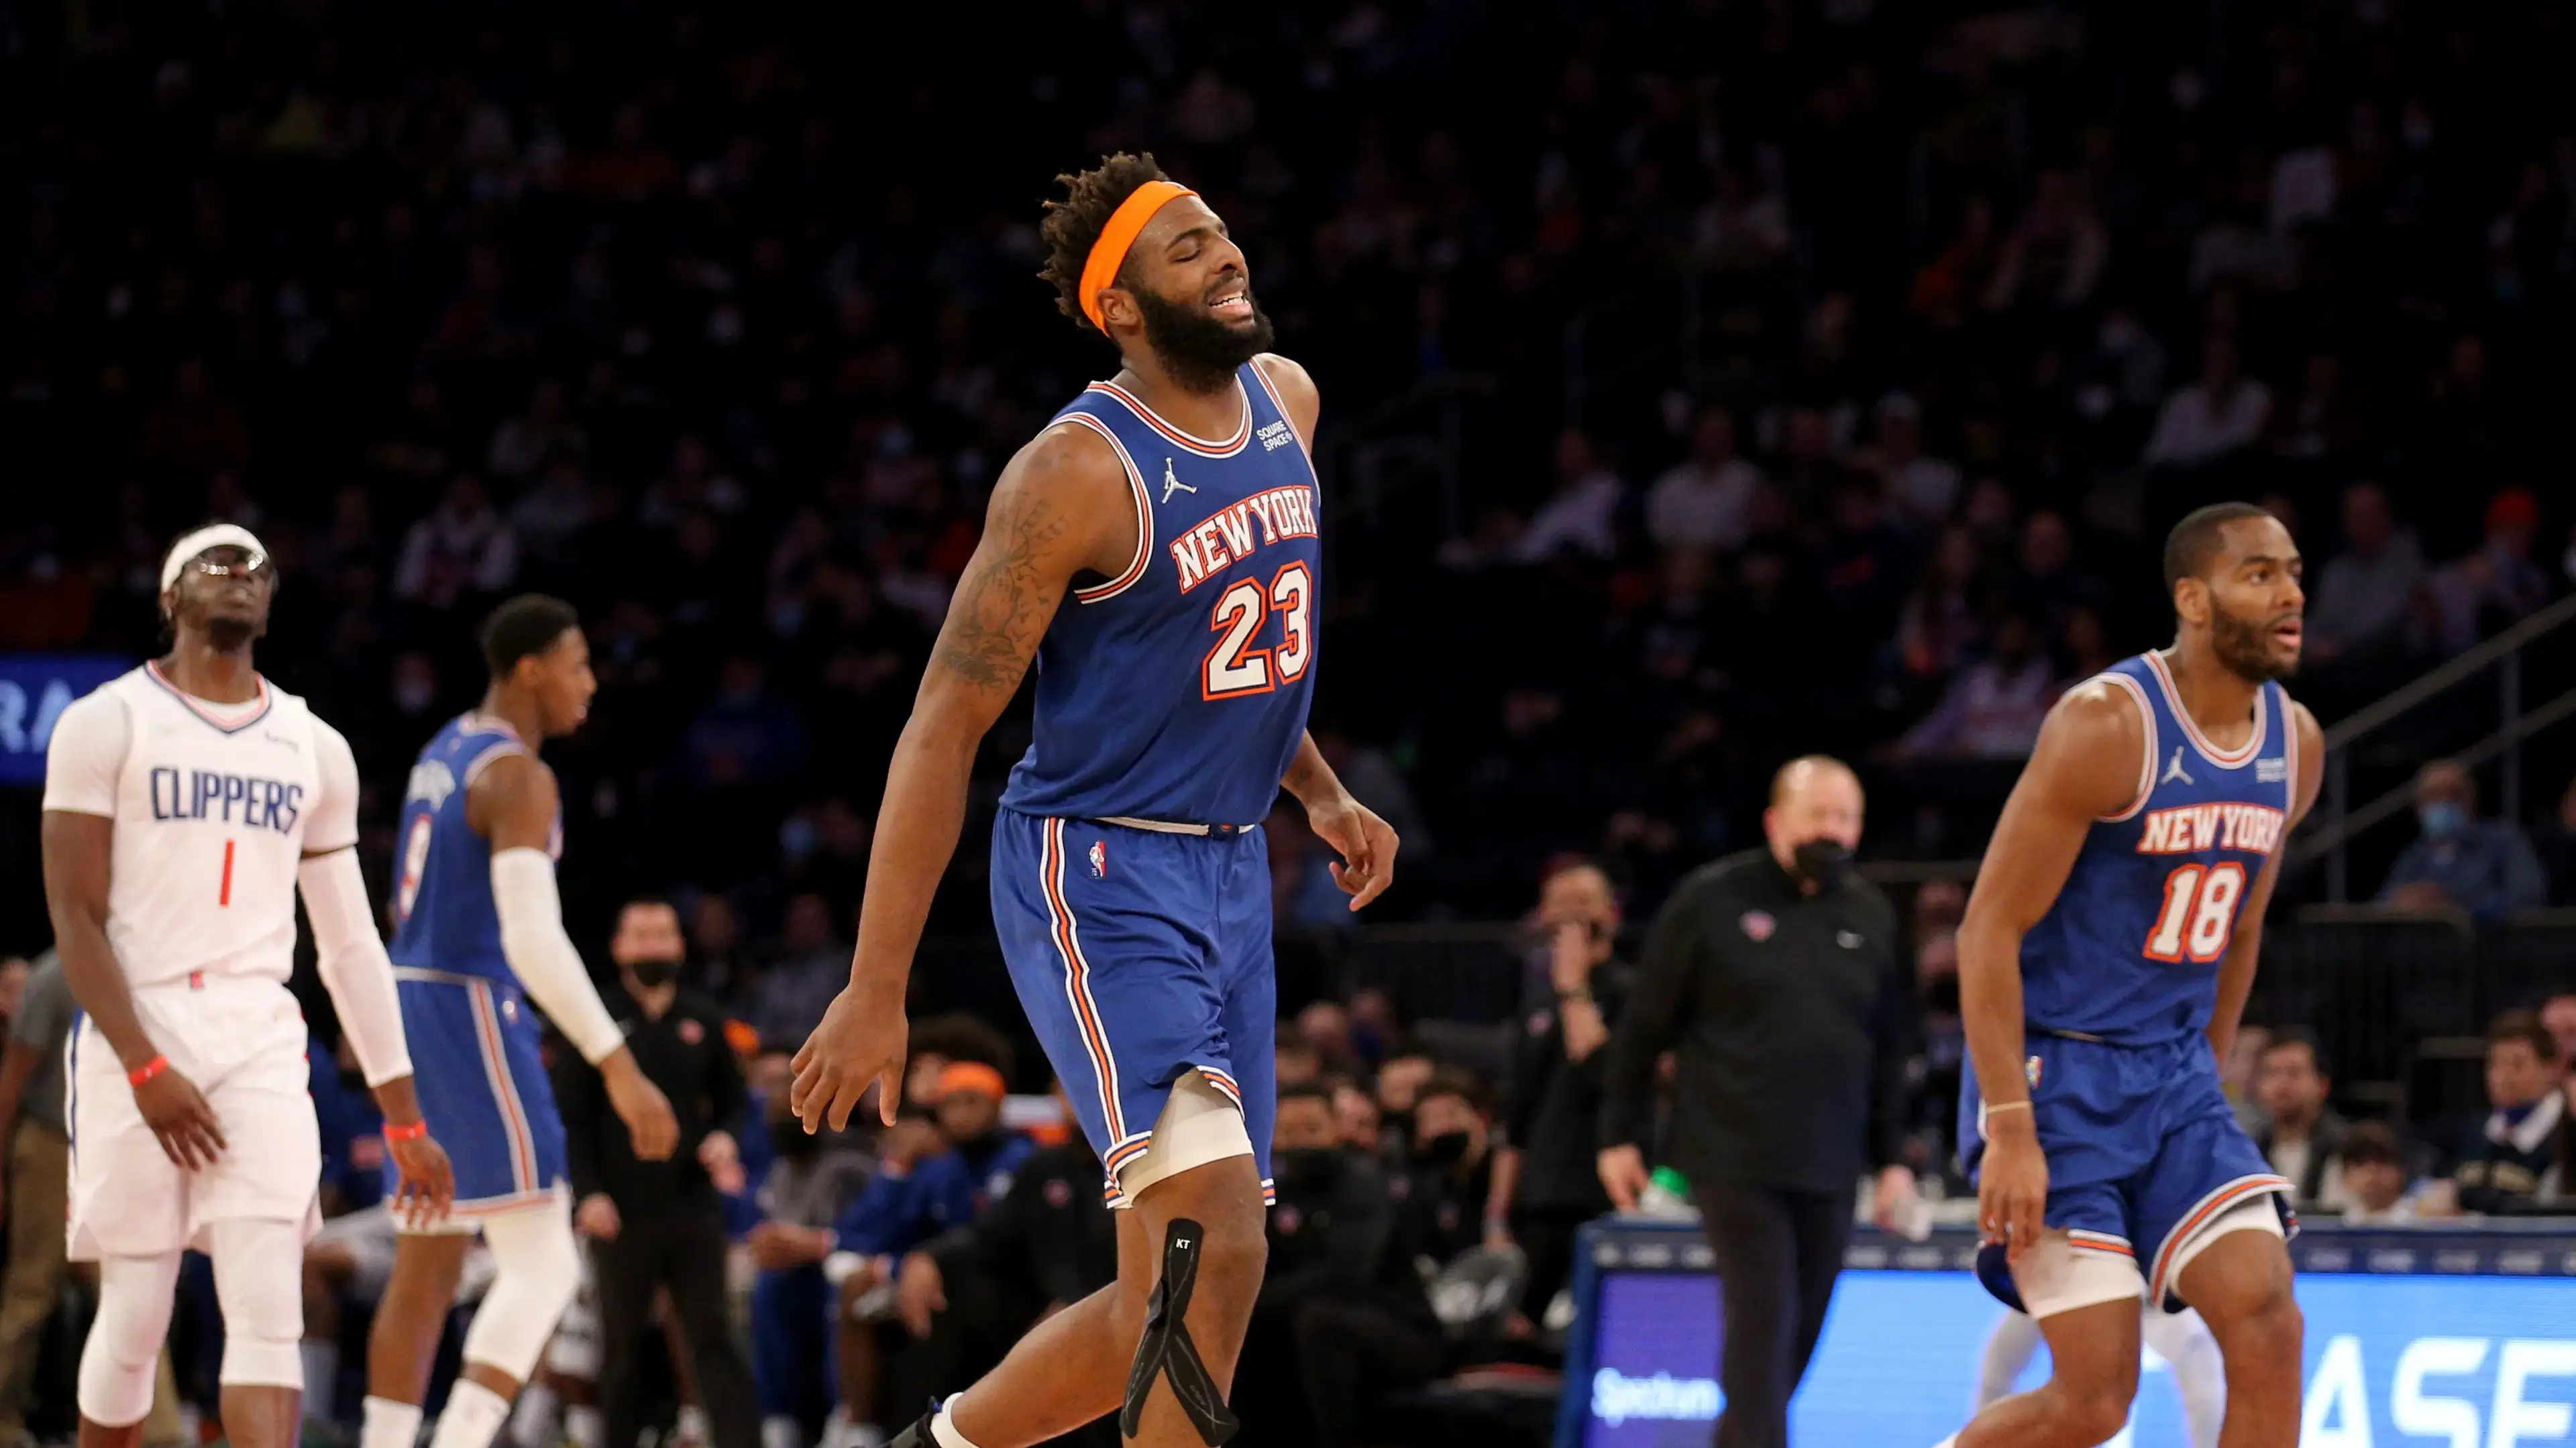 Jan 23, 2022; New York, New York, USA; New York Knicks center Mitchell Robinson (23) reacts after an injury during the third quarter against the Los Angeles Clippers at Madison Square Garden. Mandatory Credit: Brad Penner-USA TODAY Sports / © Brad Penner-USA TODAY Sports